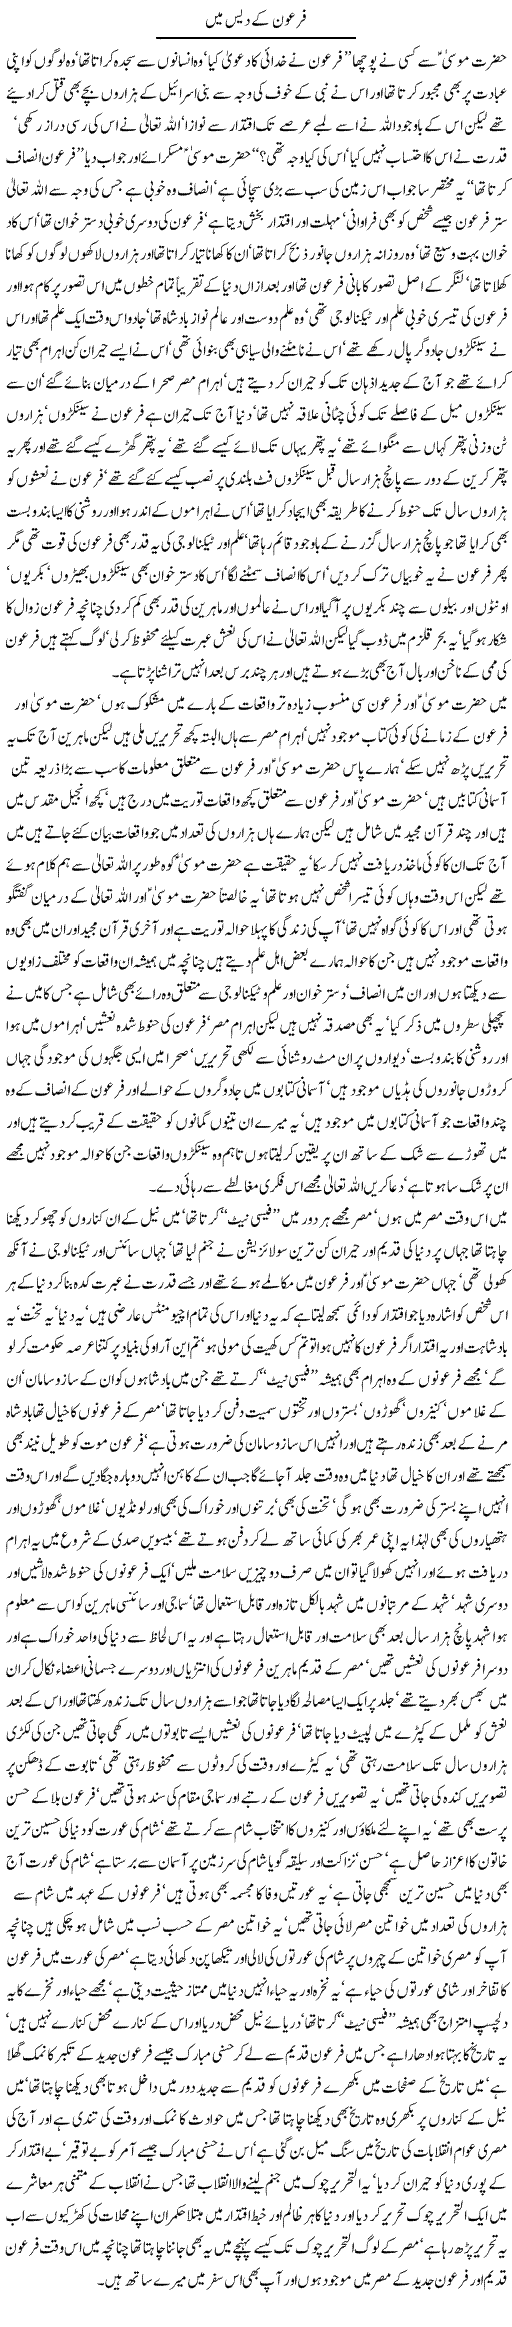 In Egypt Express Column Javed Chaudhry 6 May 2012